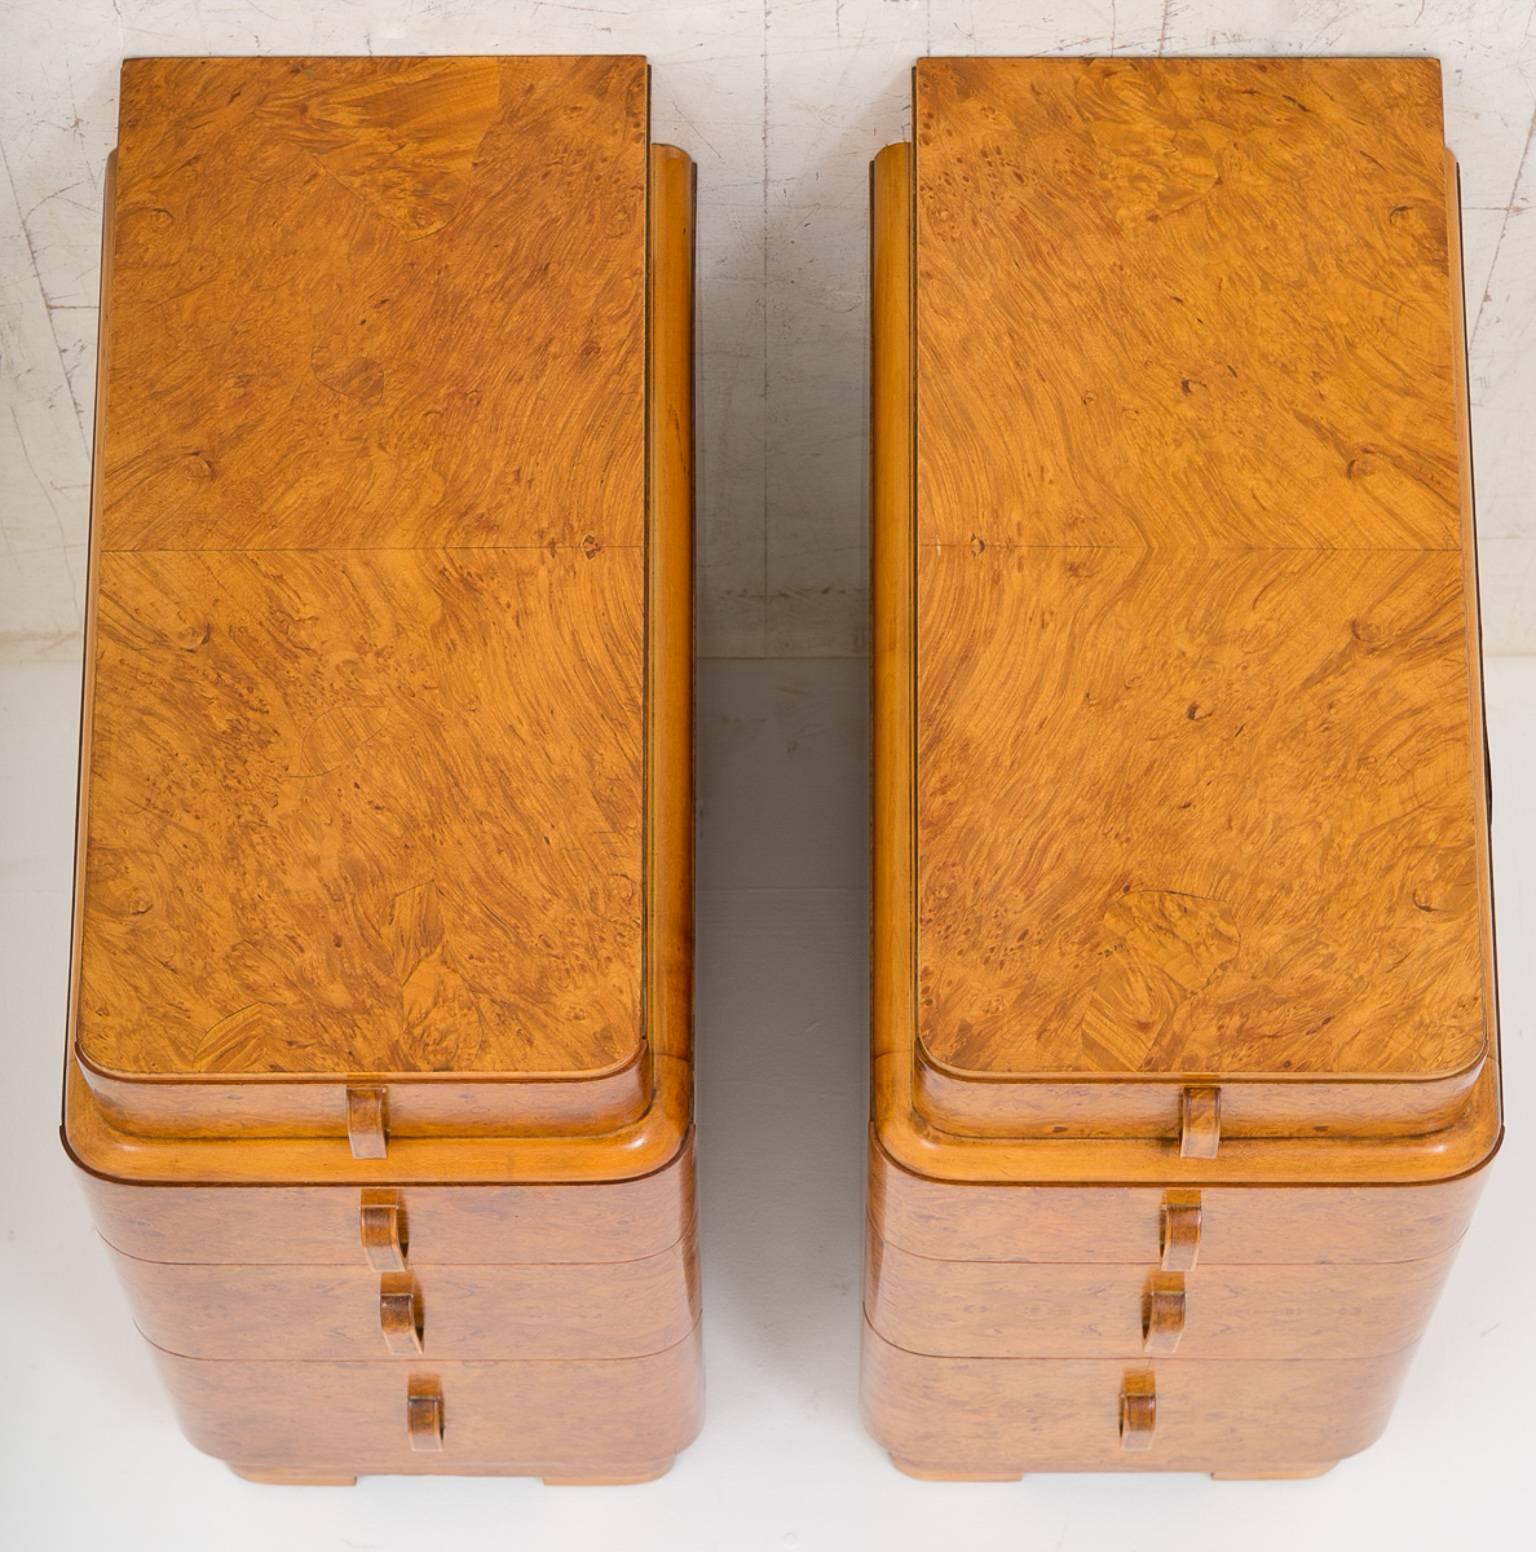 A pair of superb quality bedside chests in the Art Deco style.
Standing on a block foot.
Four mahogany lined graduated drawers with original Art Deco handles which are banded in box wood.
In very good condition.

Size:
Height 29